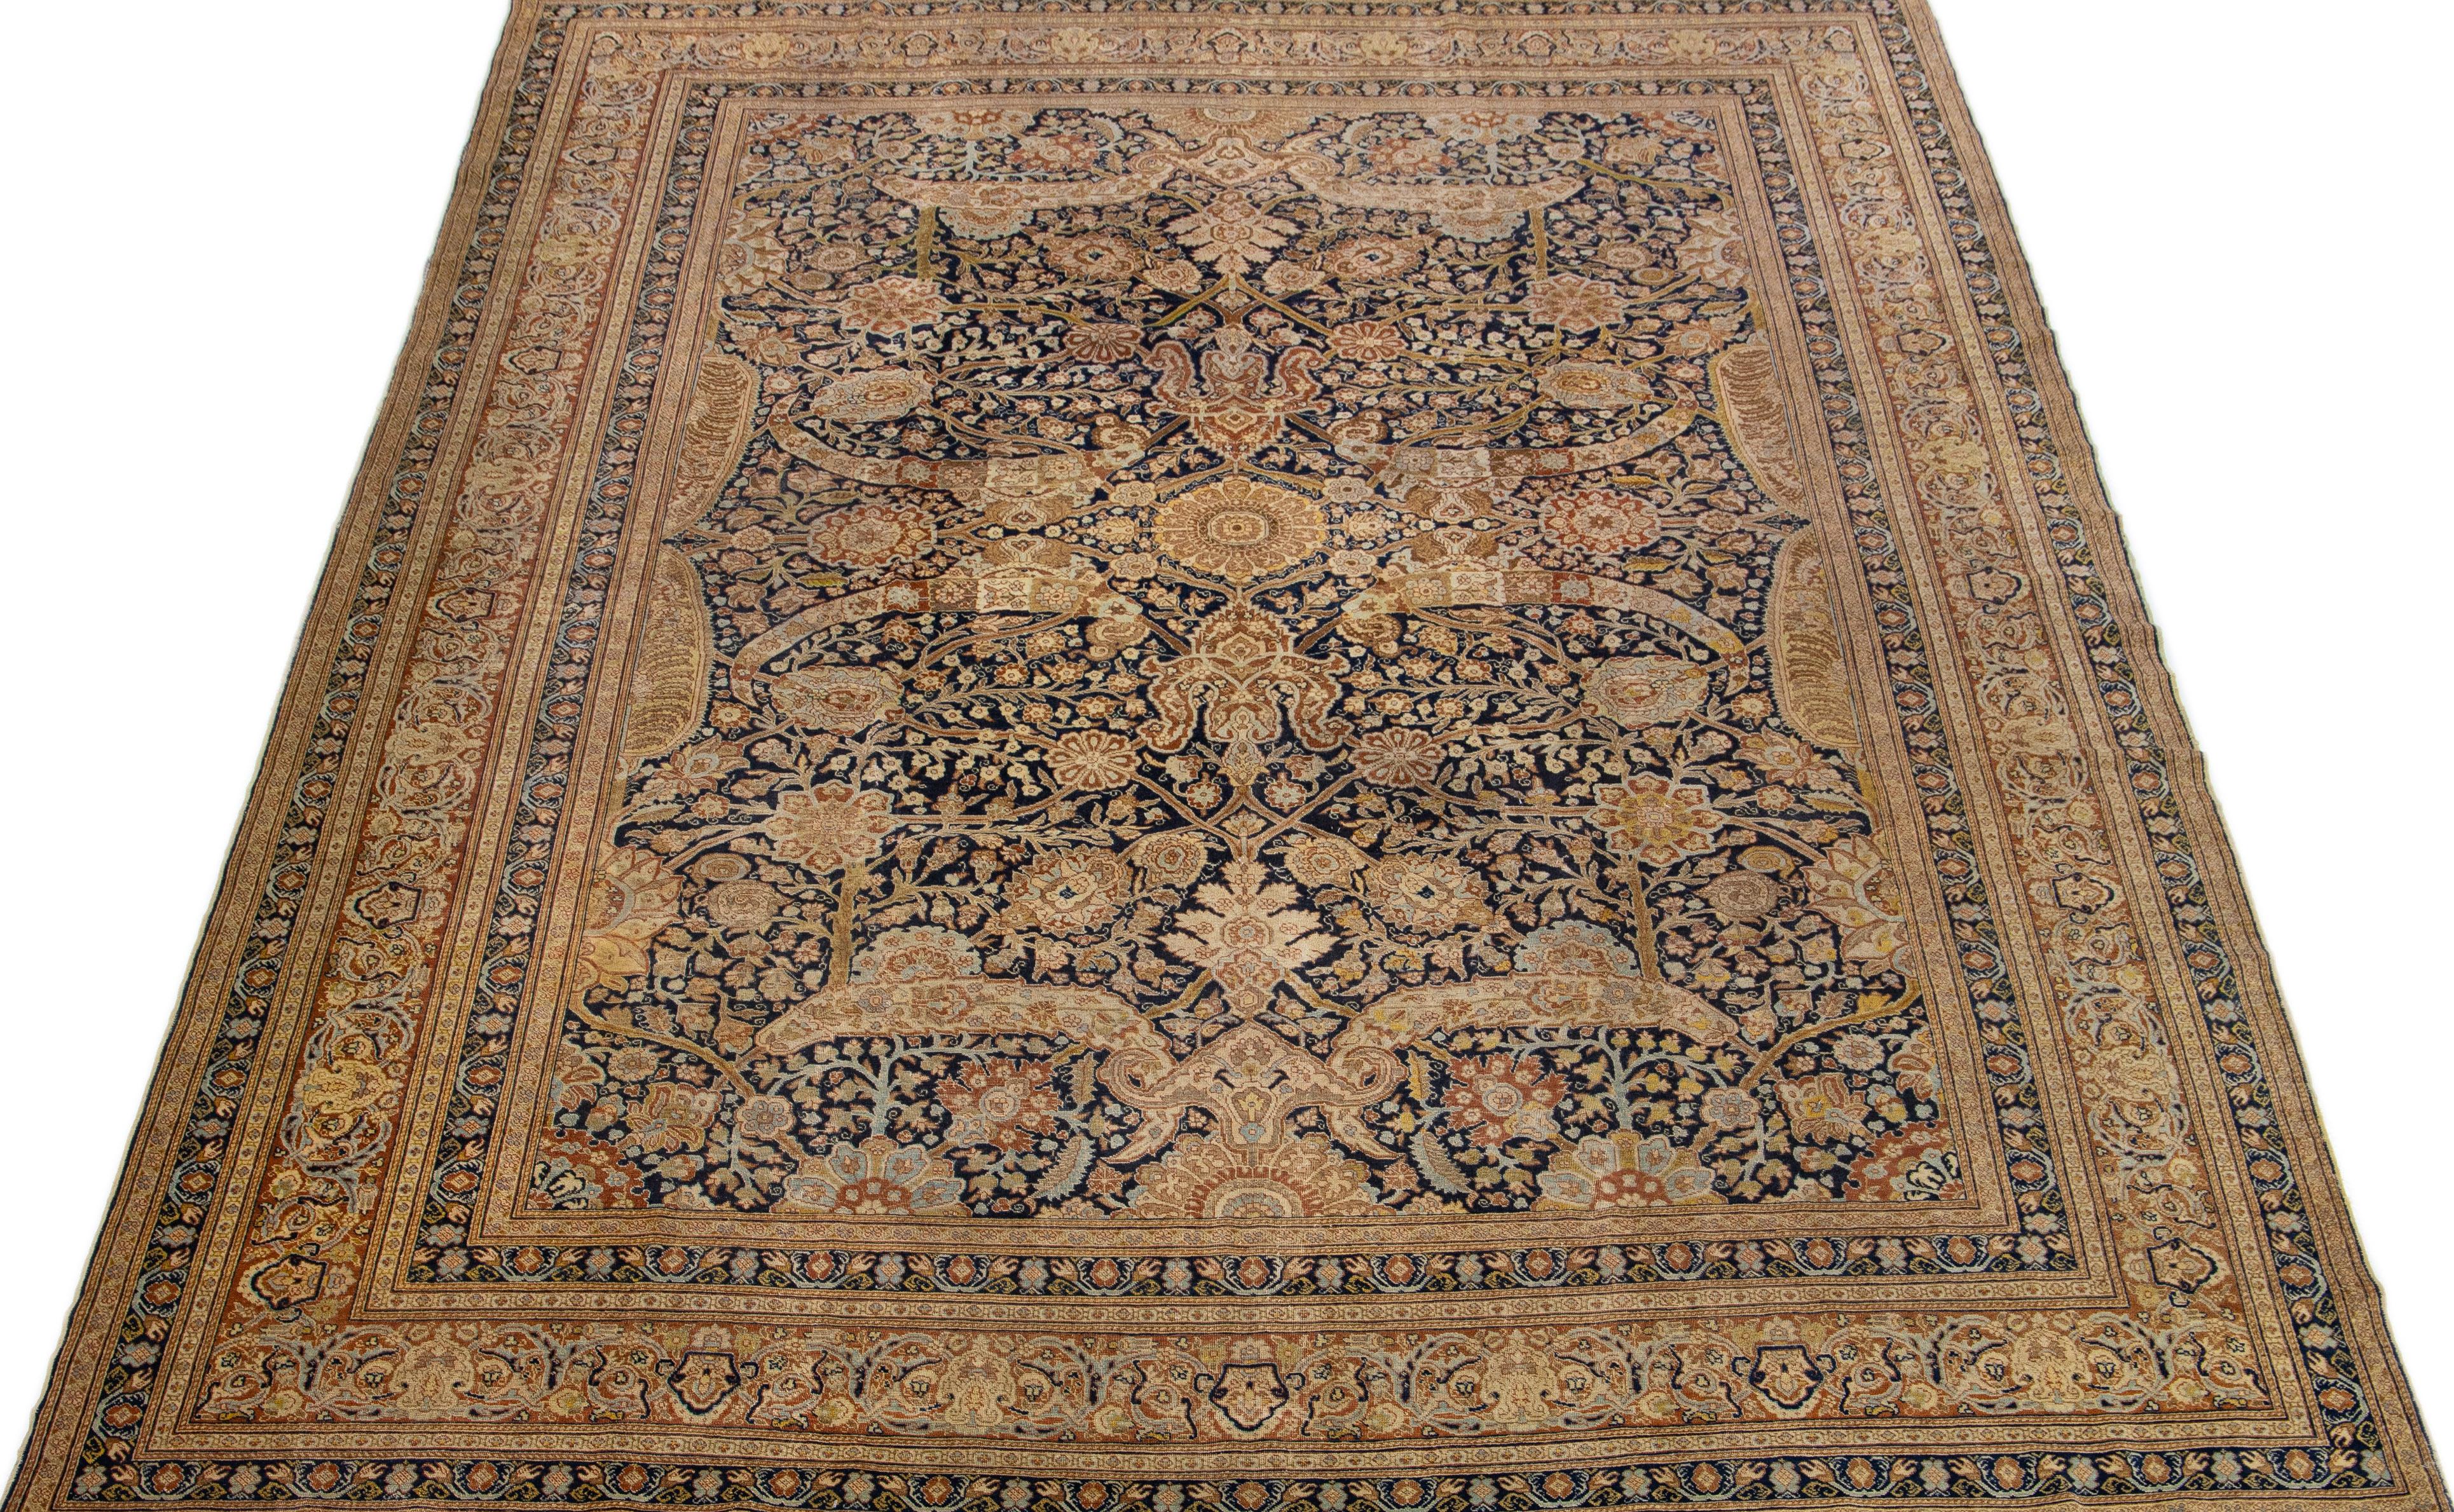 This stunning hand knotted Persian Tabriz wool rug has a beige and blue field with a gorgeous traditional floral medallion design featuring a peach accent. An antique masterpiece, this rug is a magnificent piece of art.

This rug measures 9'4